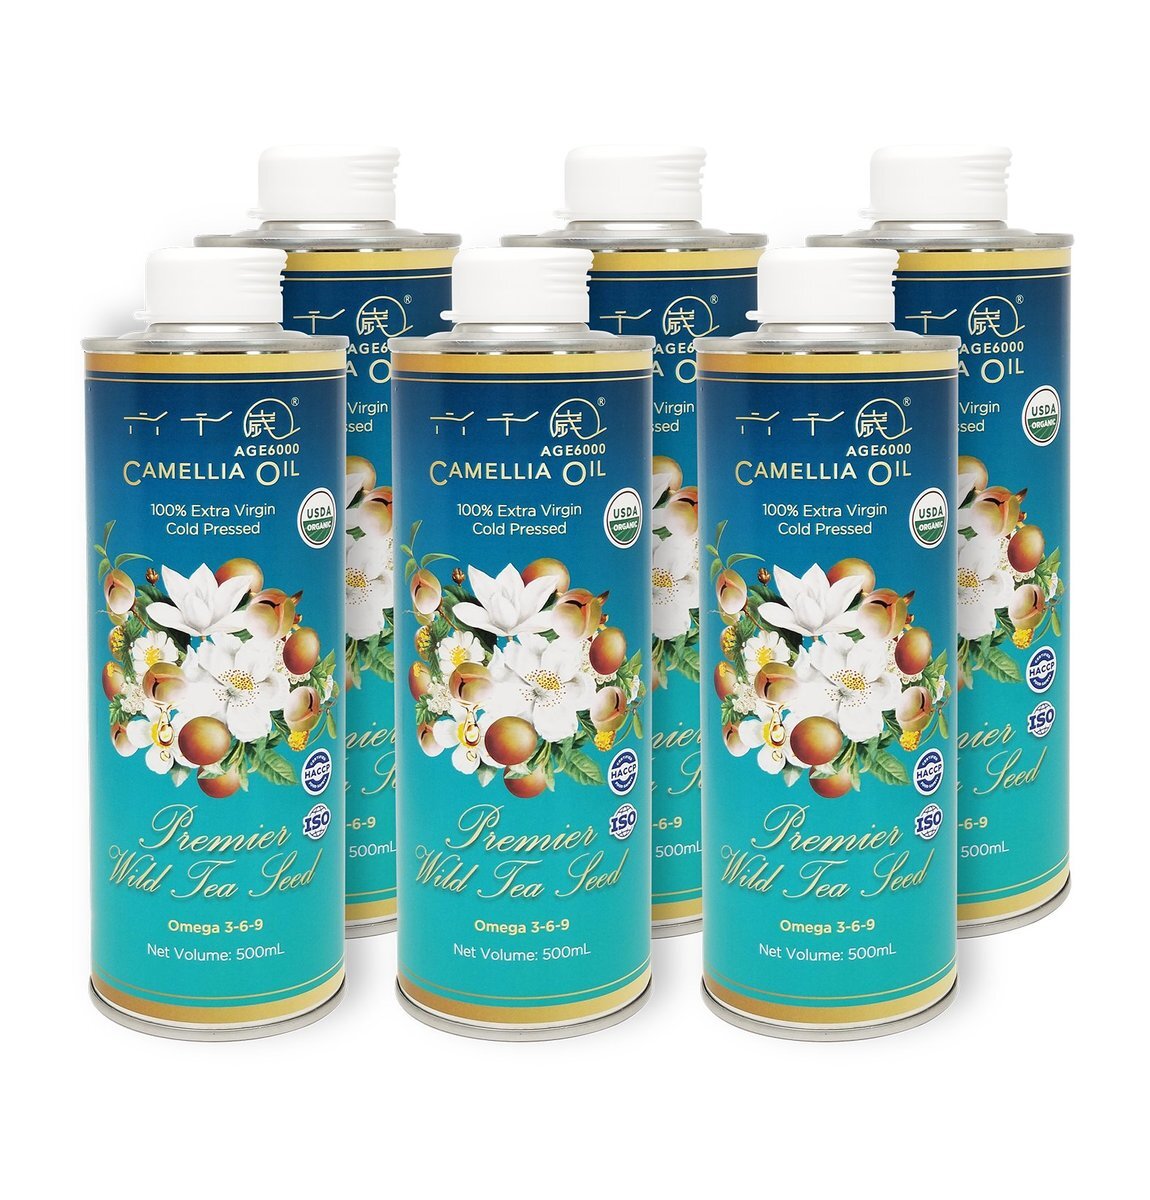 100% Extra Virgin Cold Pressed Premier Camellia Oil (500ml) - Eco Pack x 6